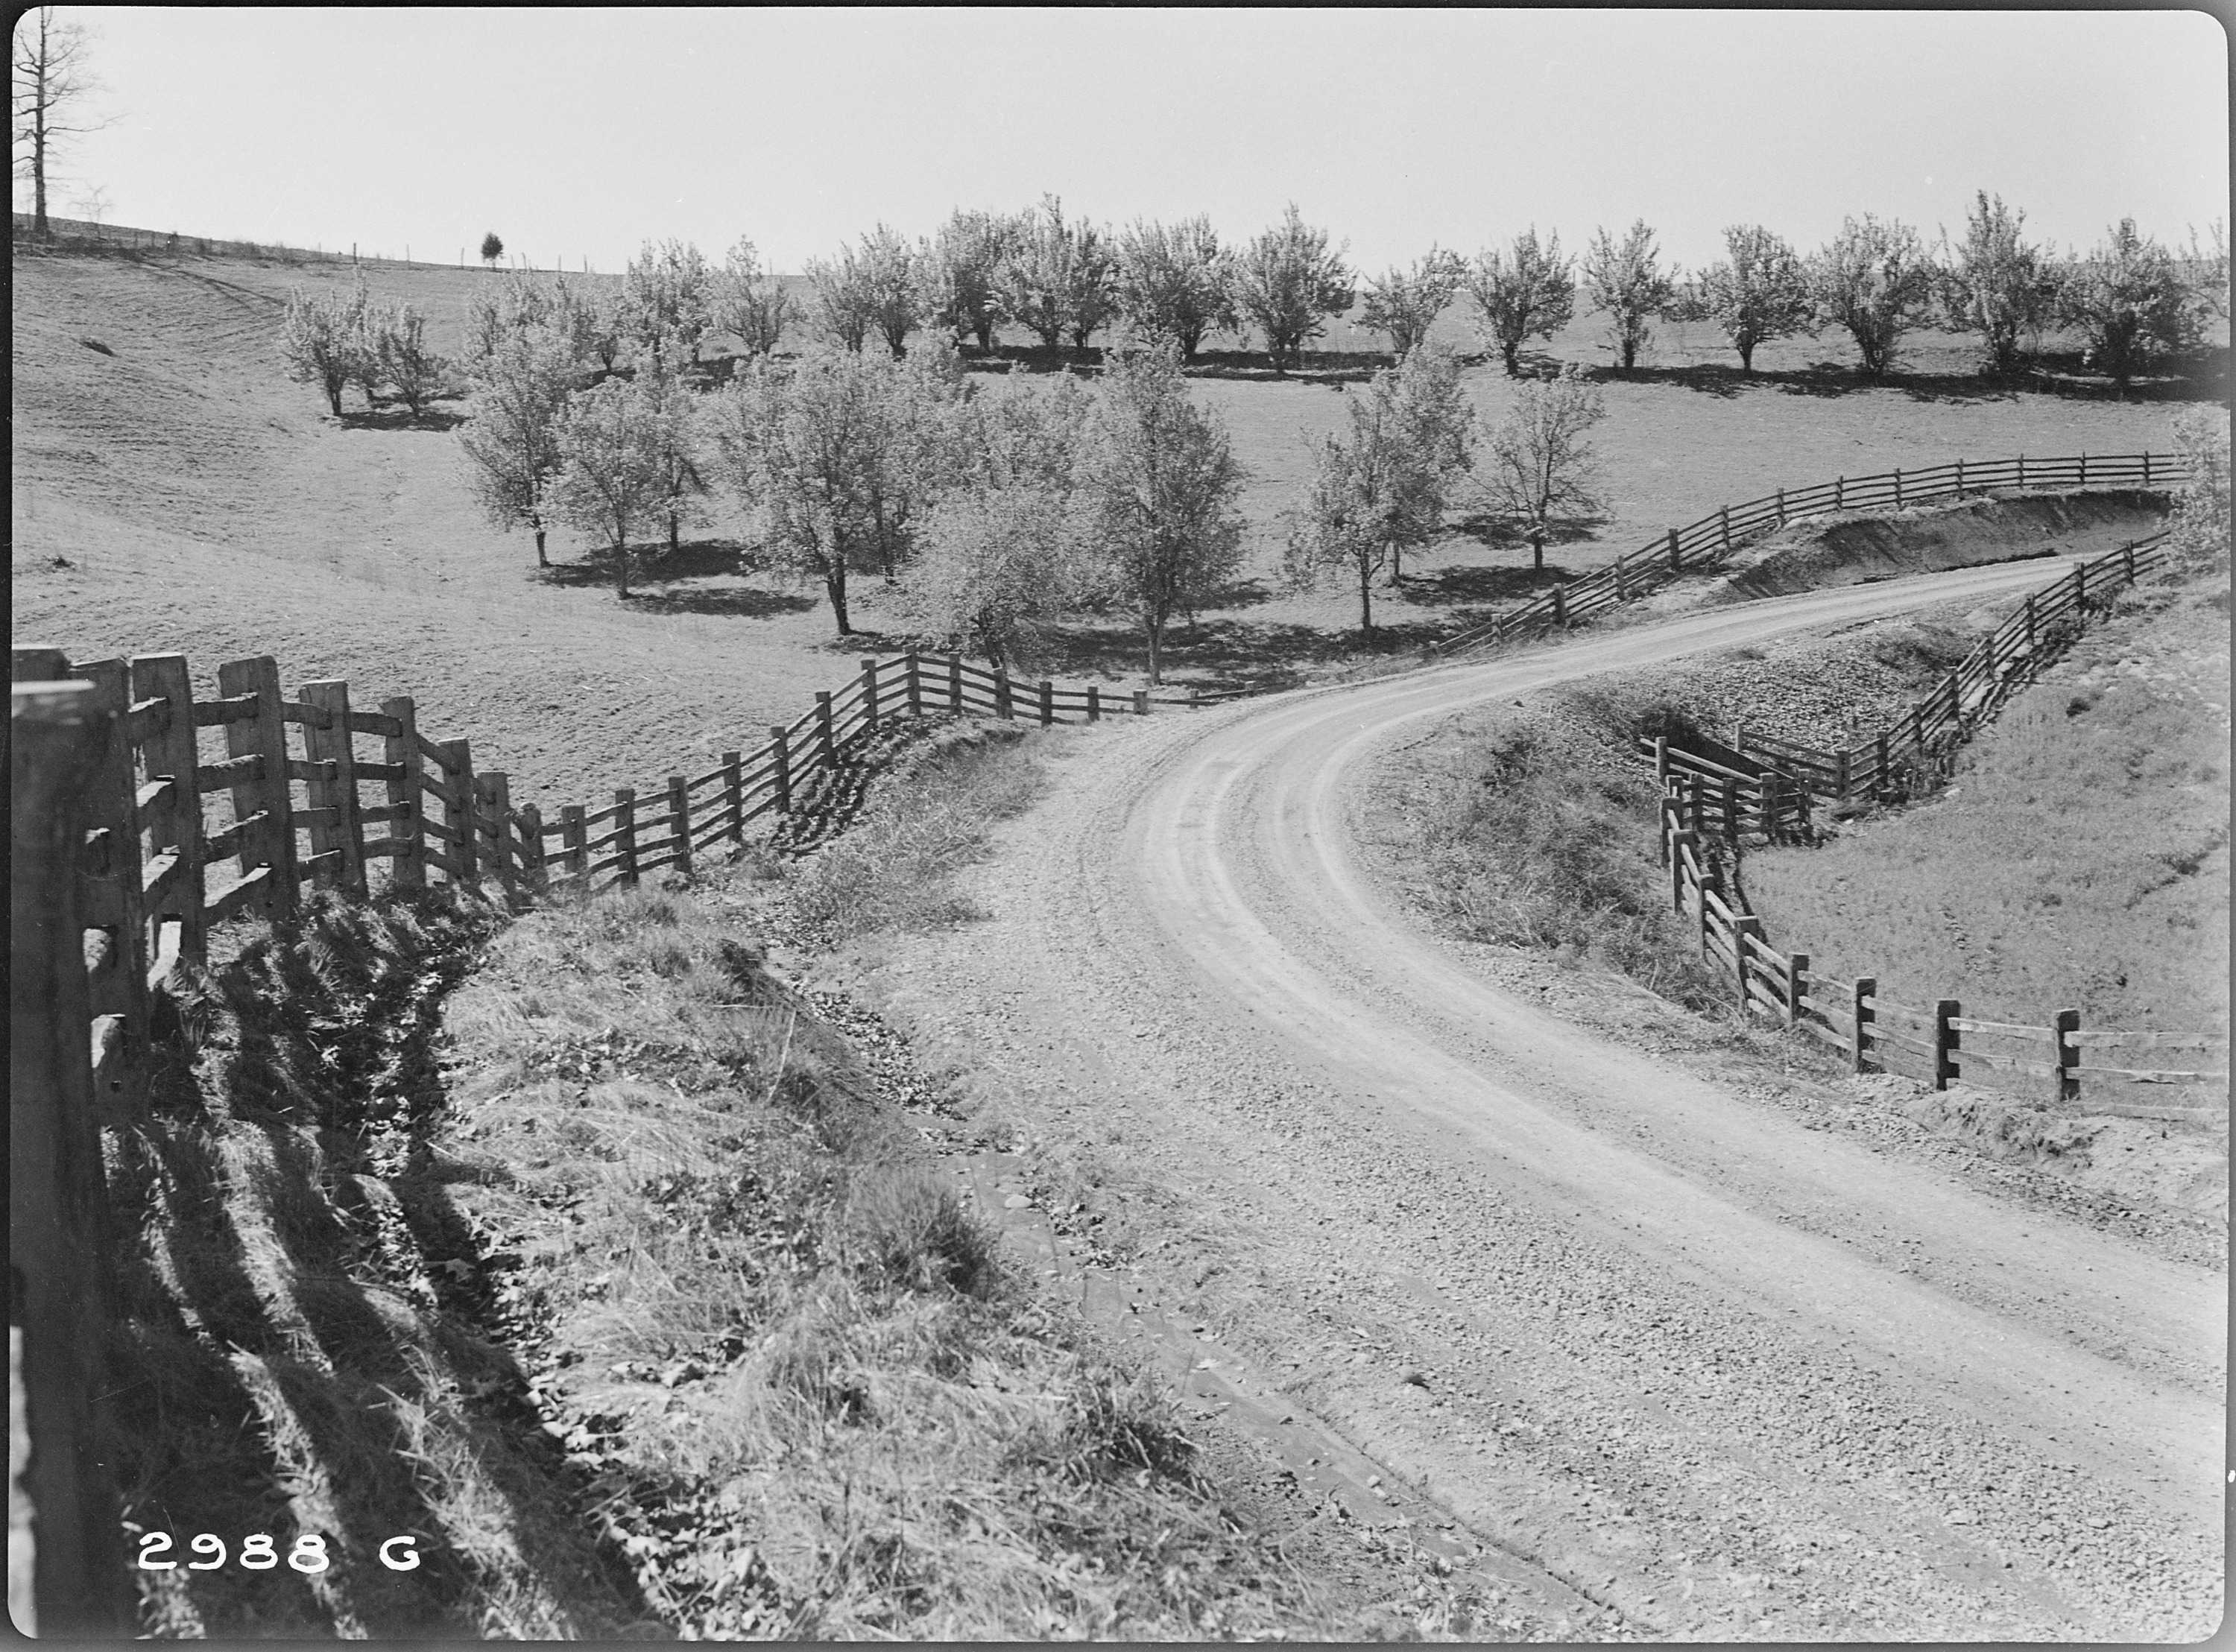 Approach road to Fort Loudon and rail fence built by WPA - NARA - 280296